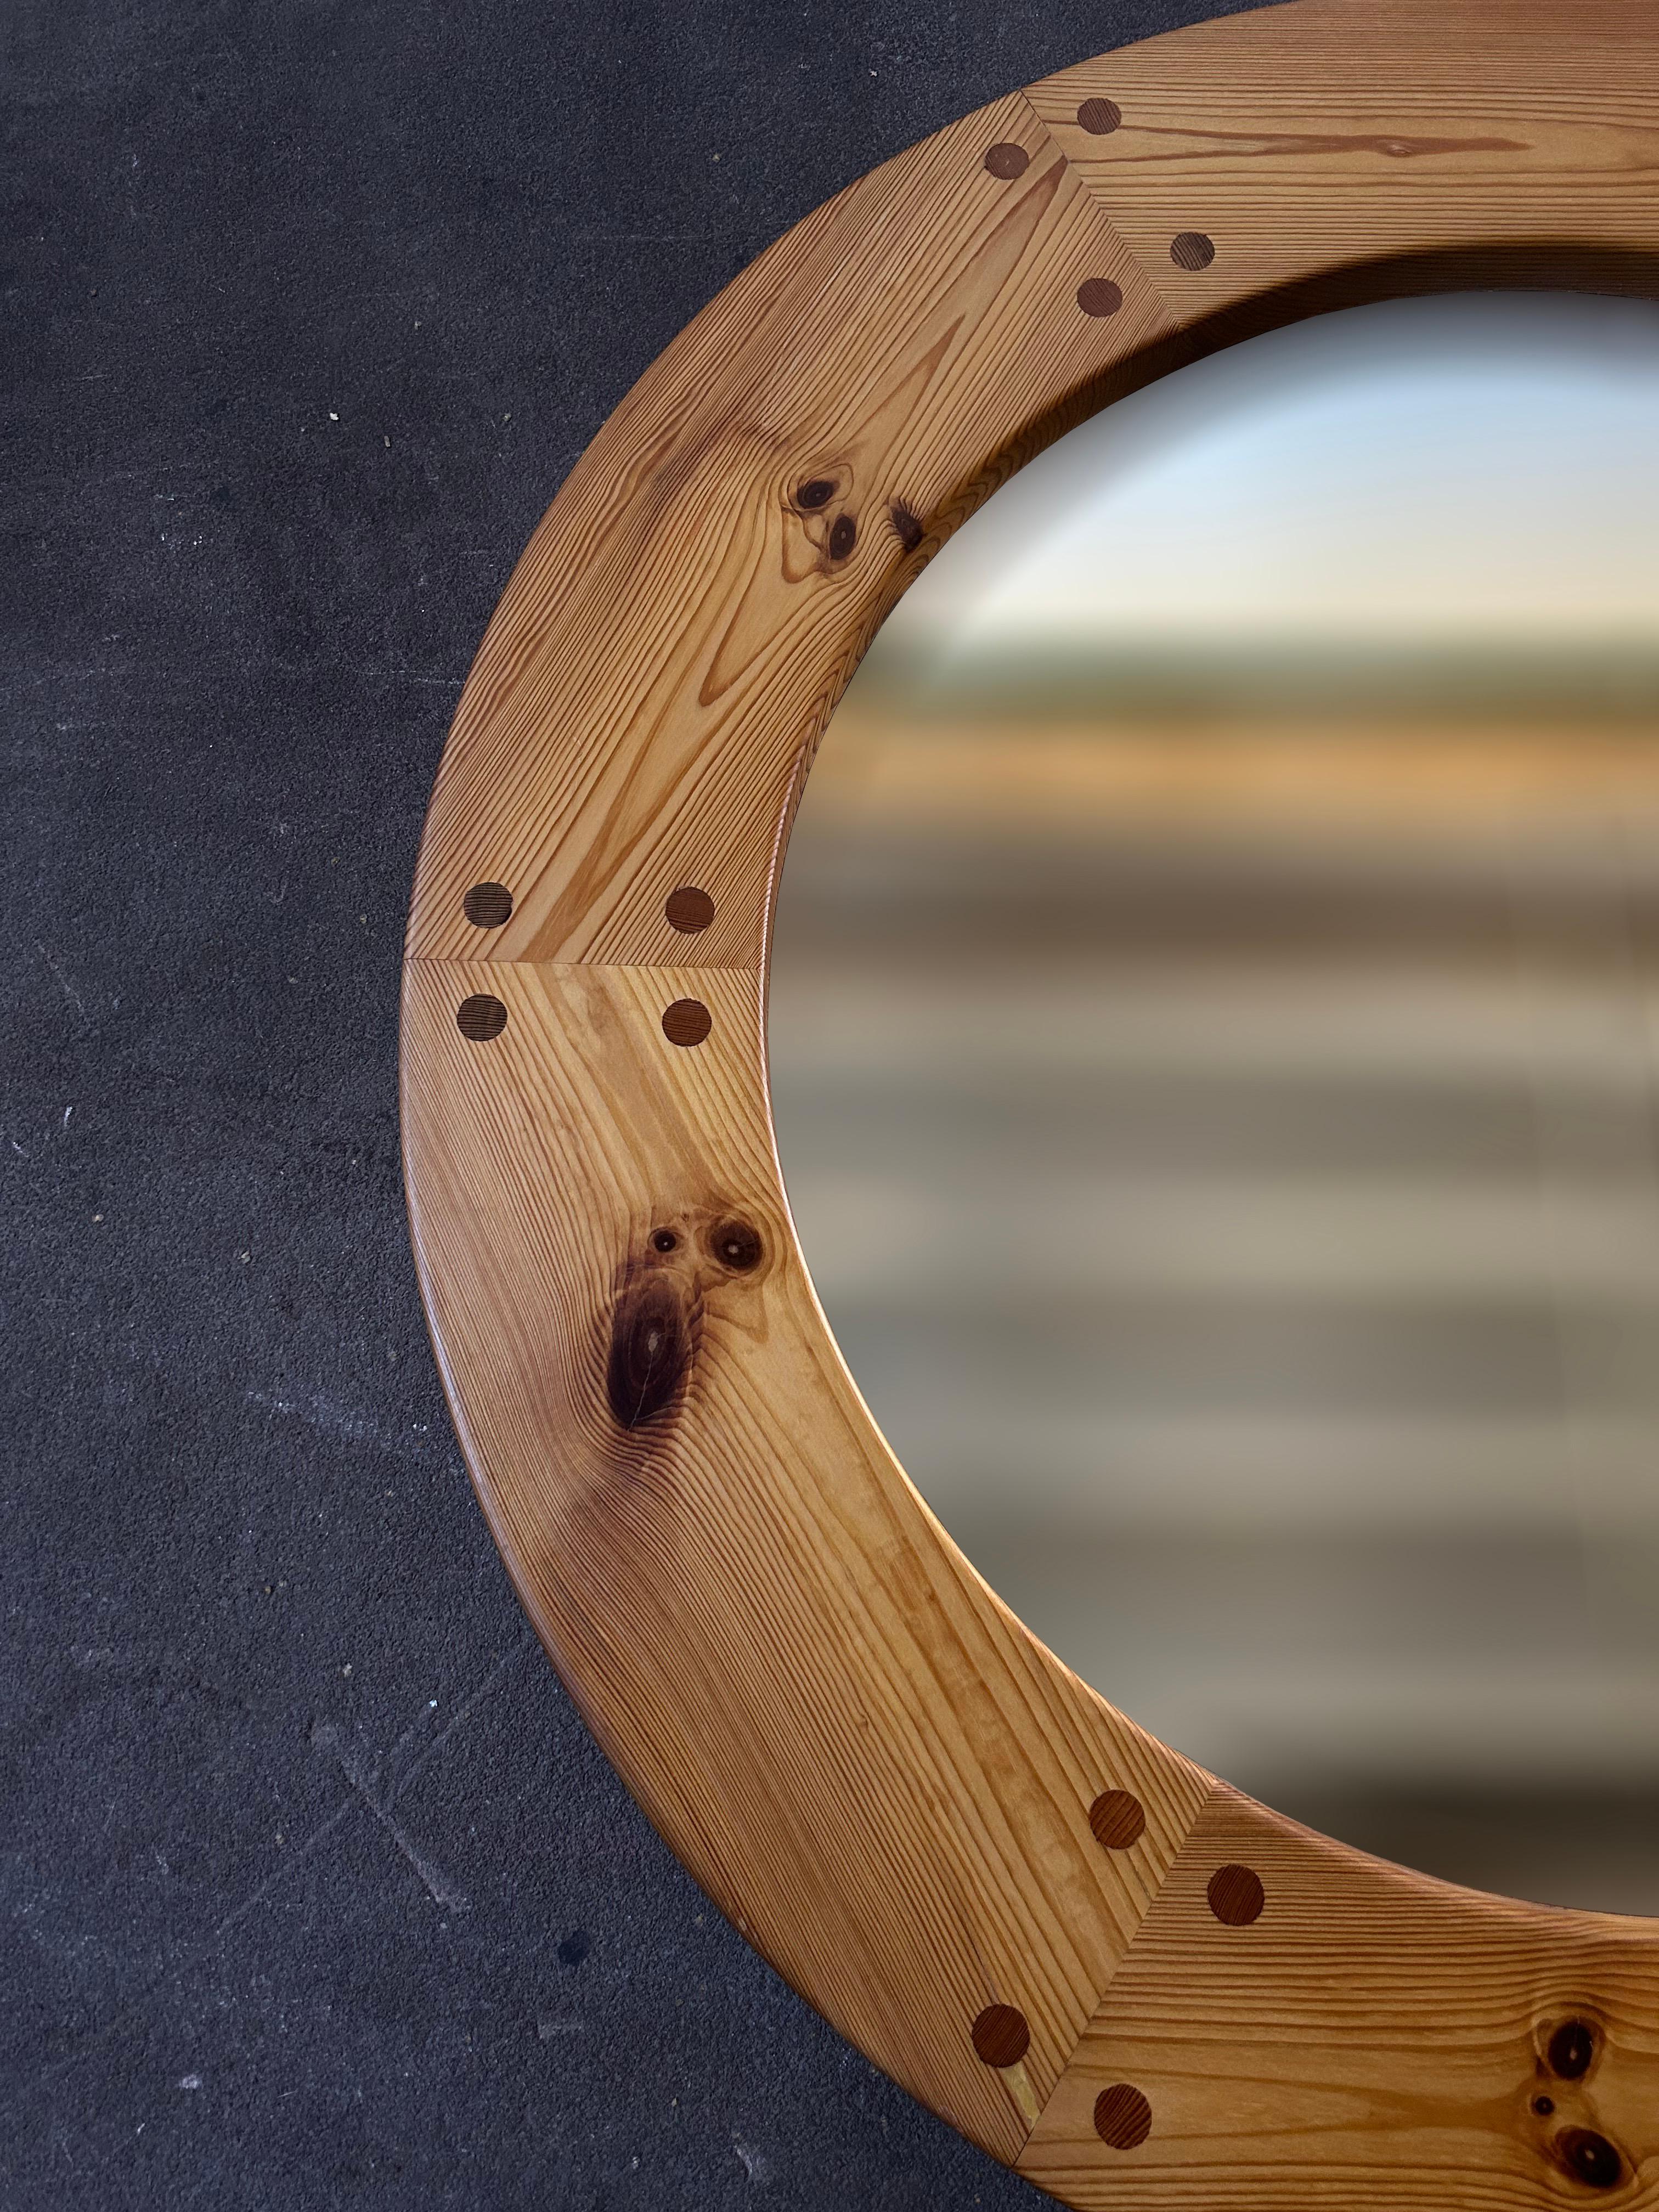 Decorative round wall mirror in solid pine with decorative visible round wooden dowels designed by Swedish designers Uno & Östen Kristiansson and manufactured by Luxus Vittsjö in Sweden in the 1960’s.
The mirror is the perfect detail for any style